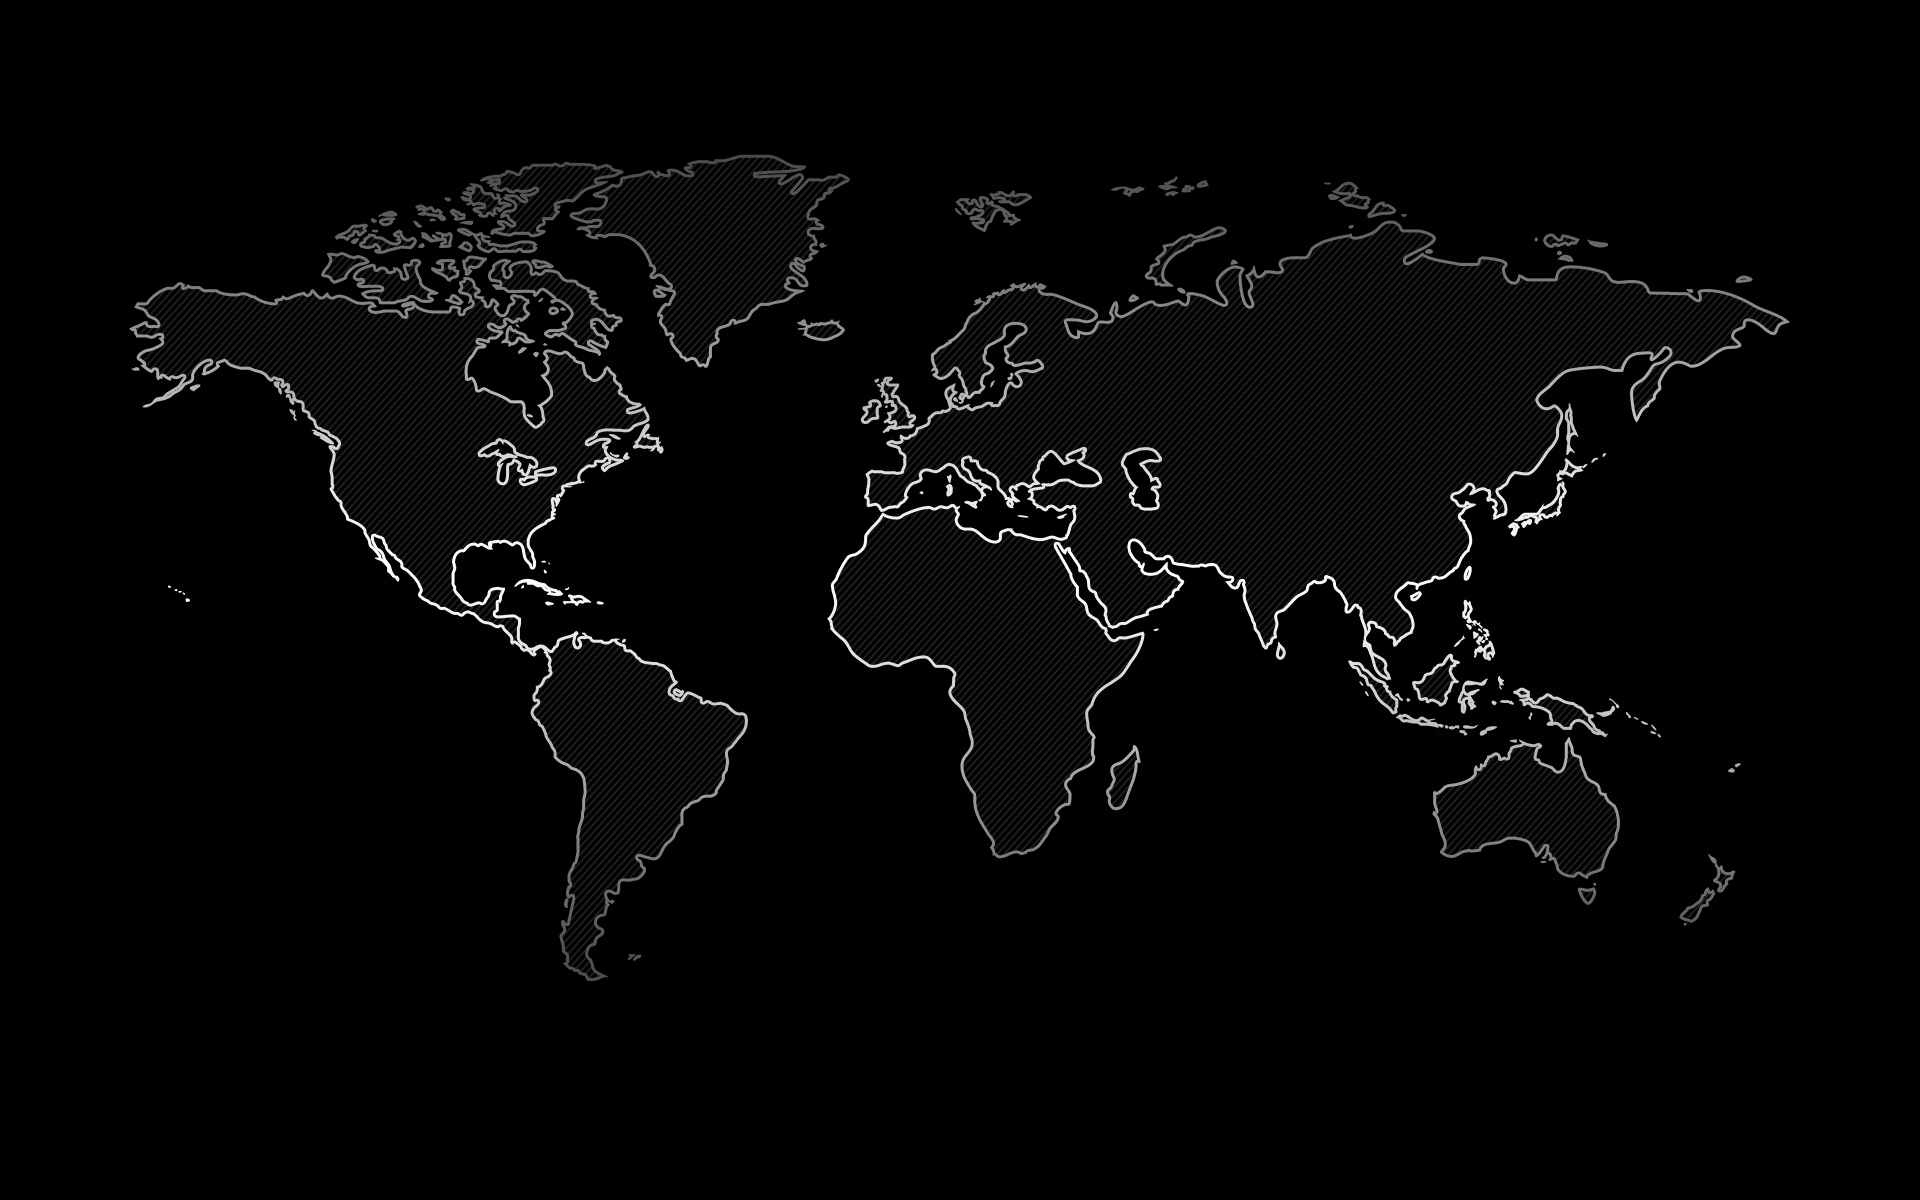 Download wallpaper World map, black background, continents, lines style, world map concepts for desktop with resolution 1920x1200. High Quality HD picture wallpaper